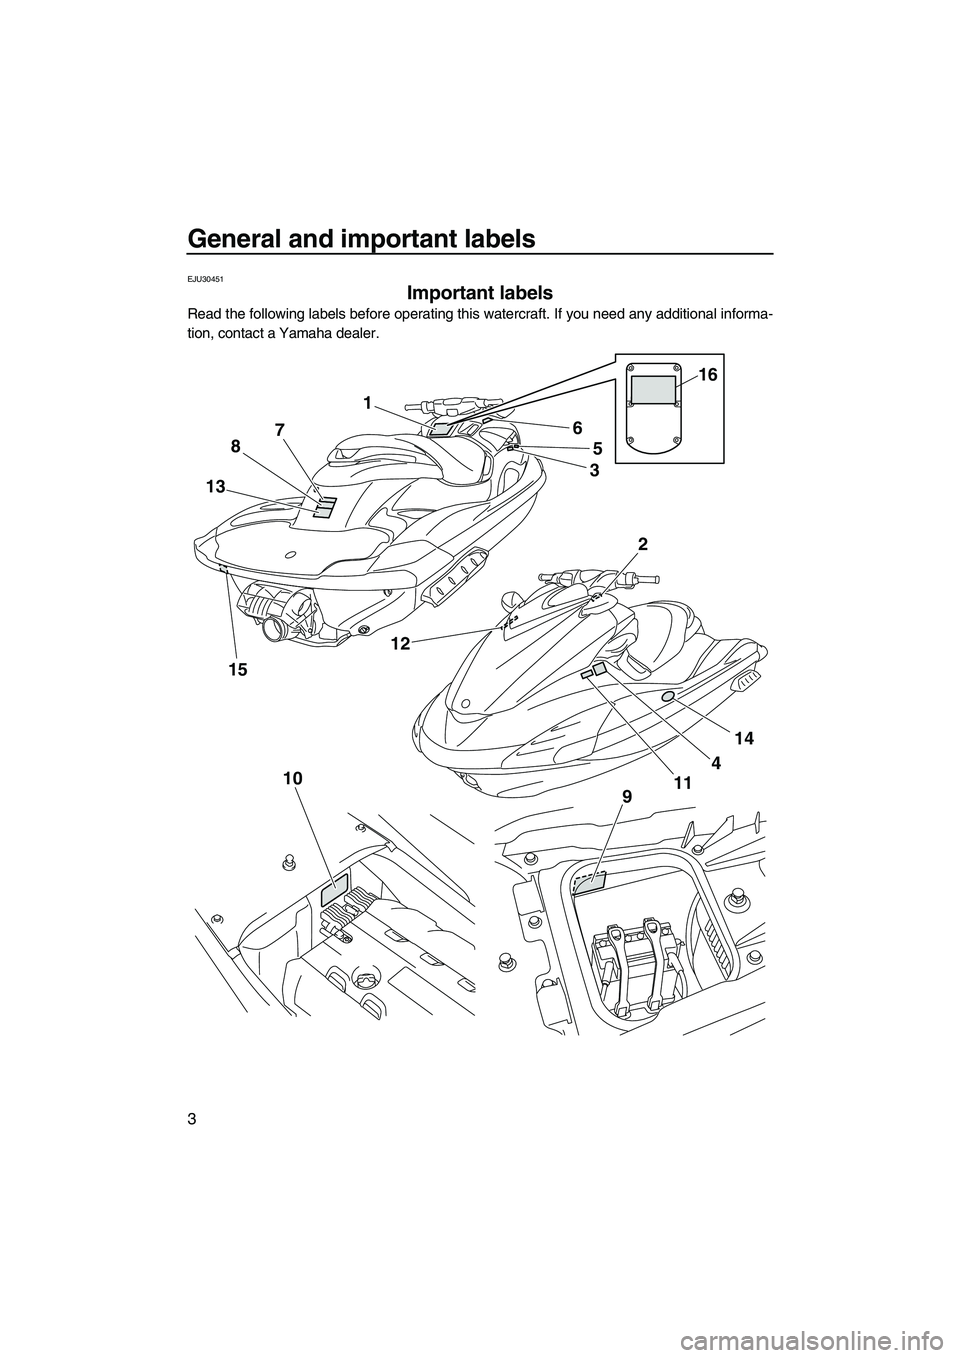 YAMAHA FZR SVHO 2009  Owners Manual General and important labels
3
EJU30451
Important labels 
Read the following labels before operating this watercraft. If you need any additional informa-
tion, contact a Yamaha dealer.
1
5
3
4
11 6
87